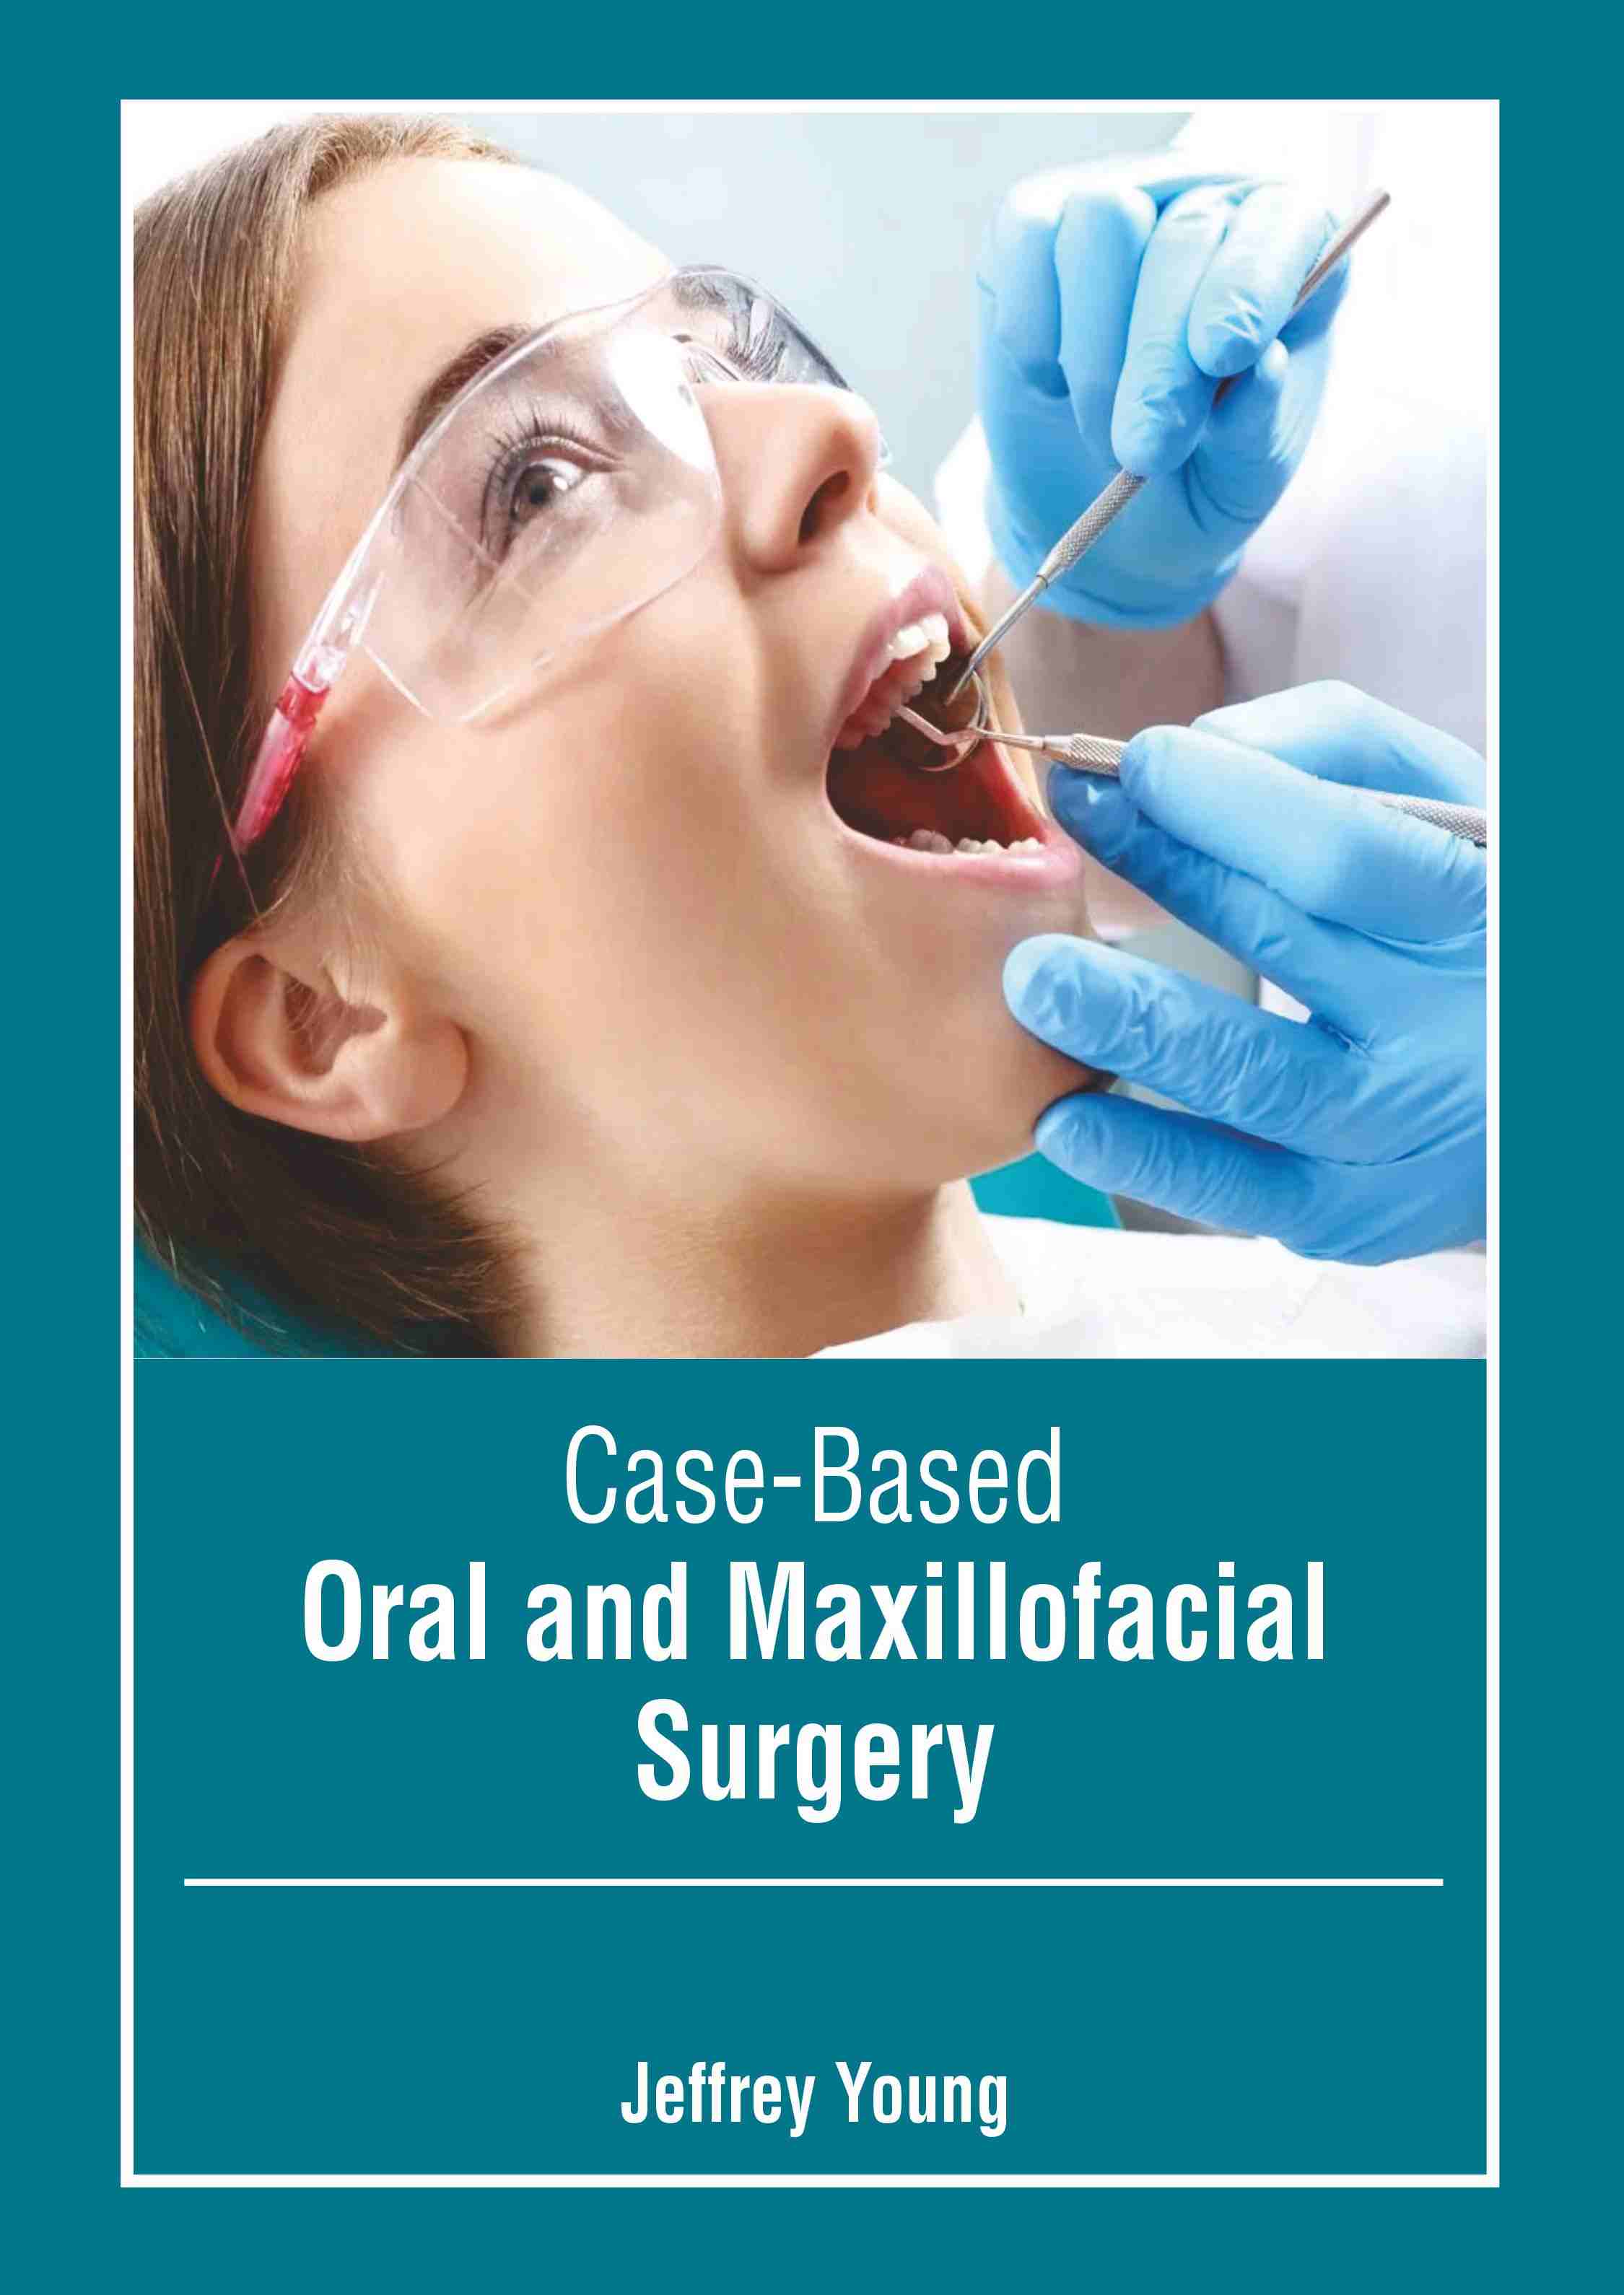 

exclusive-publishers/american-medical-publishers/case-based-oral-and-maxillofacial-surgery-9798887406237